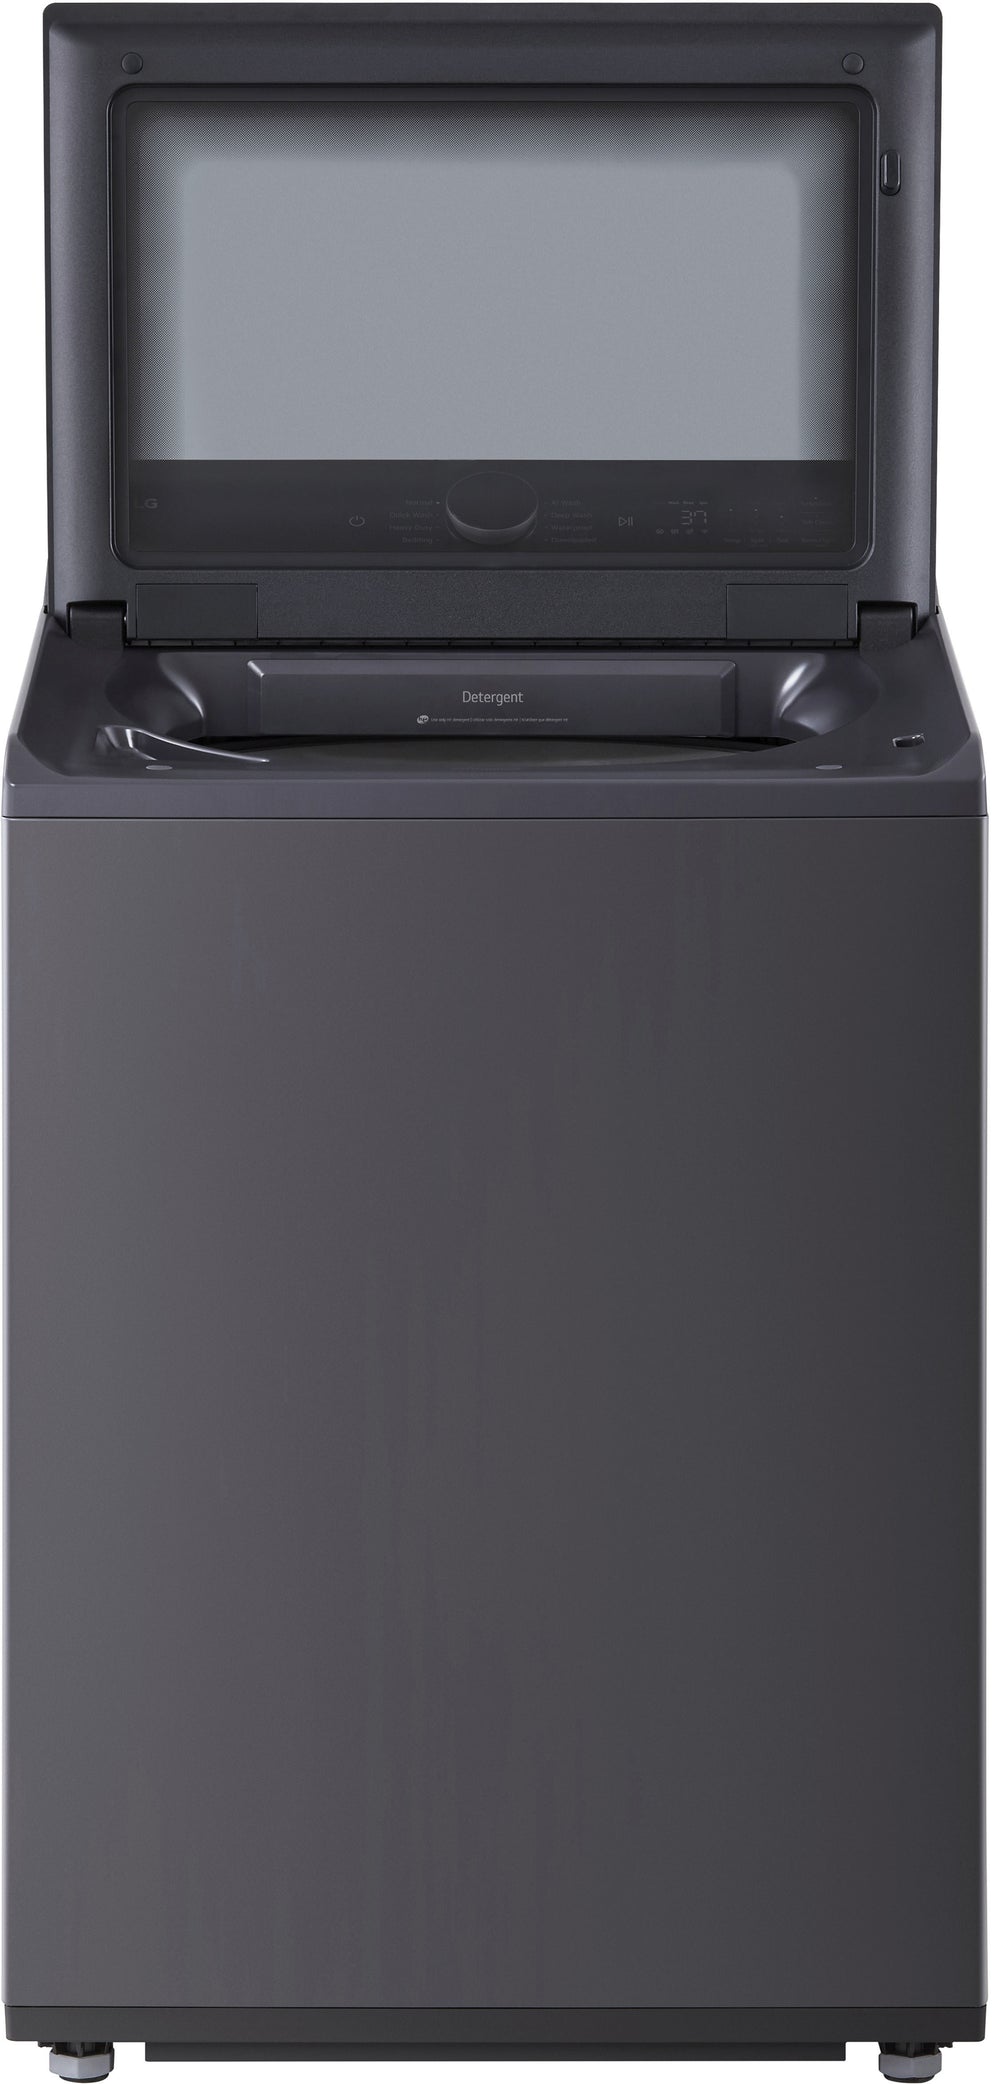 LG - 5.3 Cu. Ft. High Efficiency Smart Top Load Washer with TurboWash3D Technology - Matte Black_1